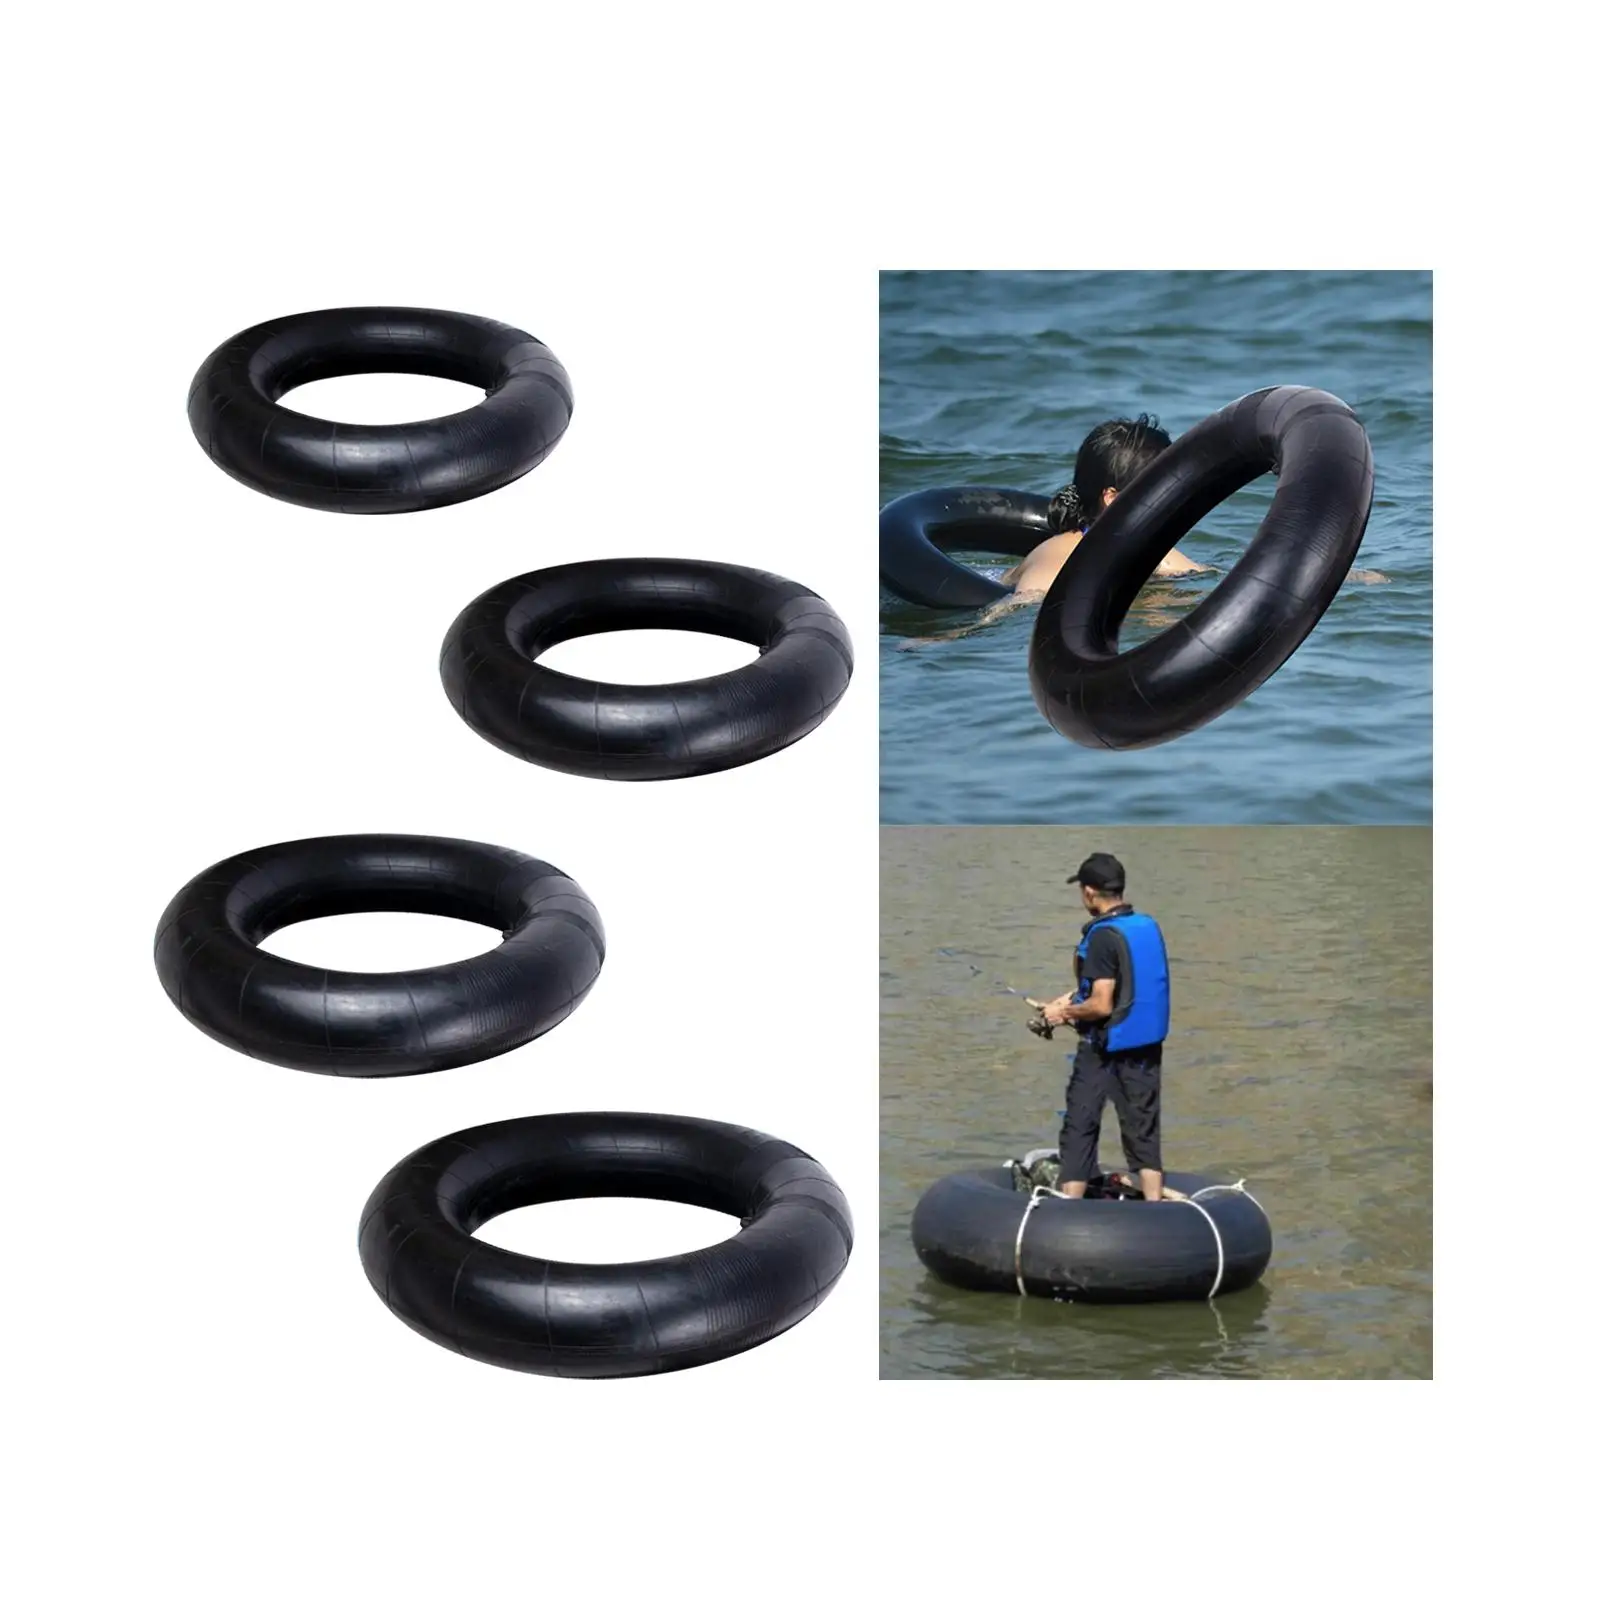 River Tube for Floating for Adults Heavy Duty Inflatable Floating Tube Raft Pool